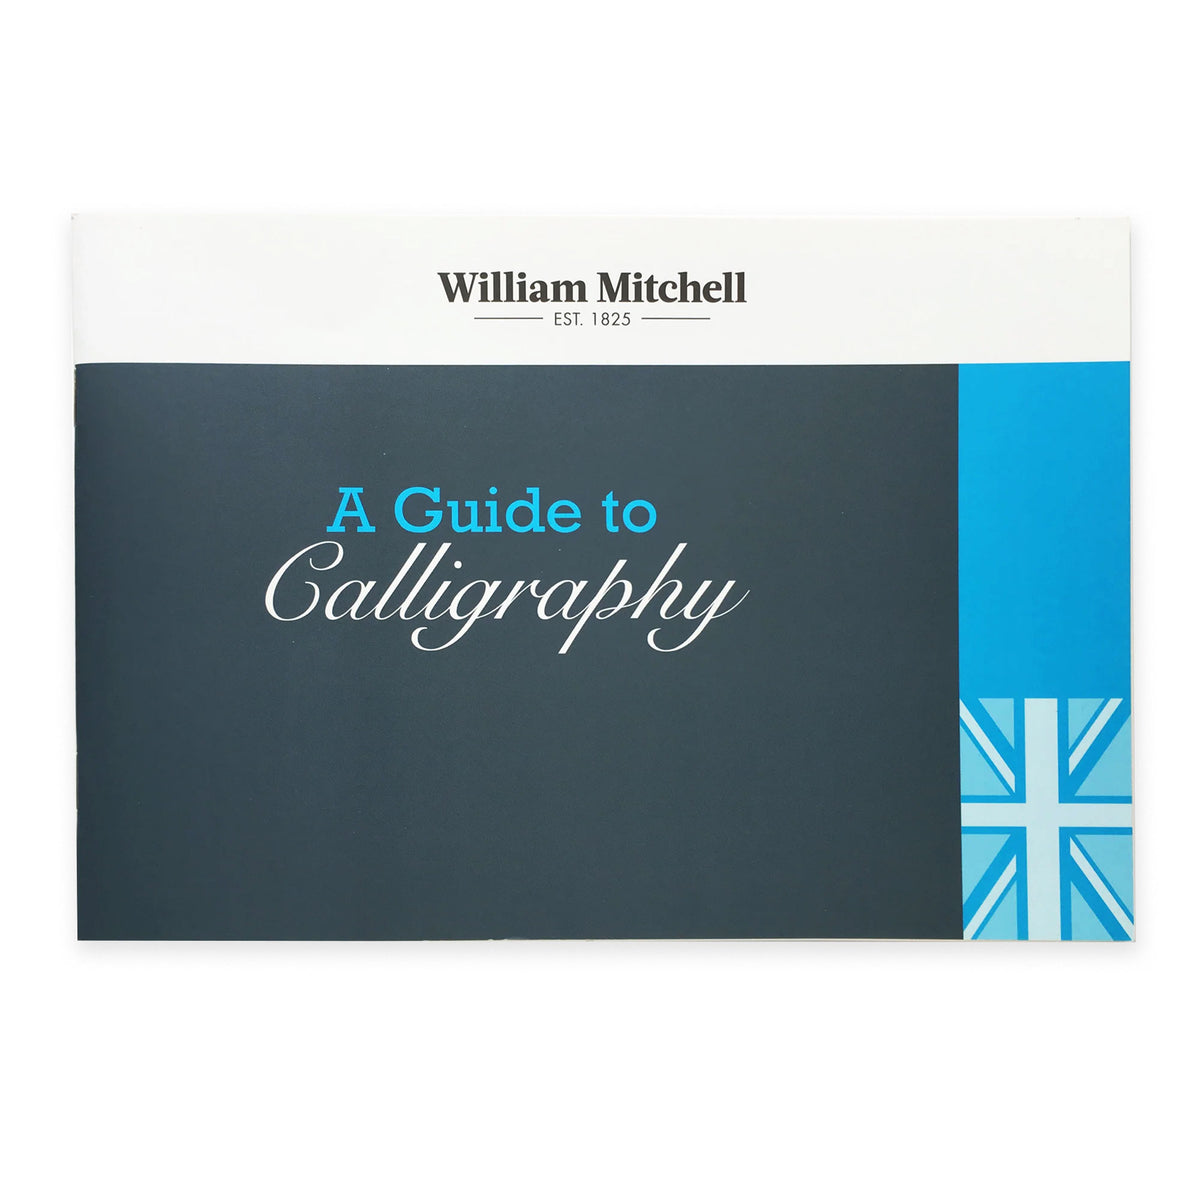 William Mitchell A Guide to Calligraphy